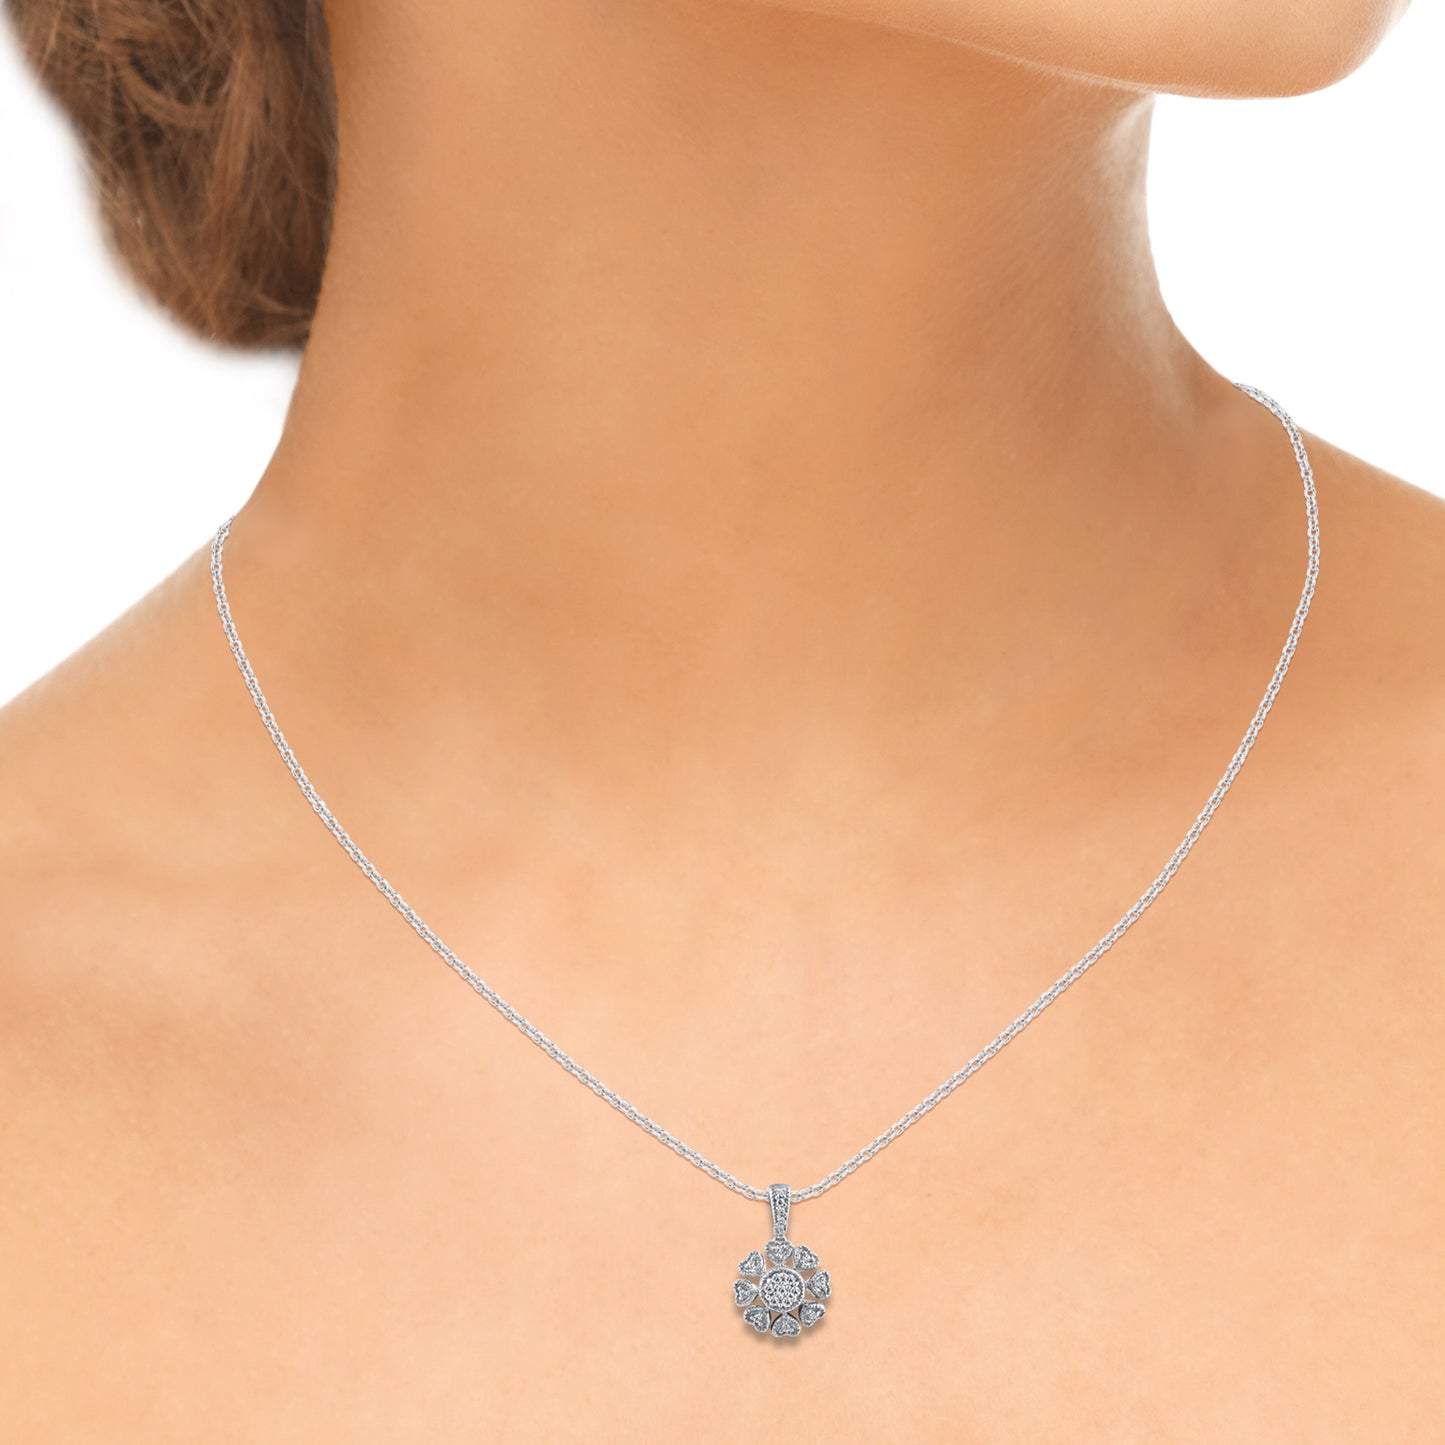 Cluster Flower Heart Petals Pendant Necklace in 925 Sterling Silver